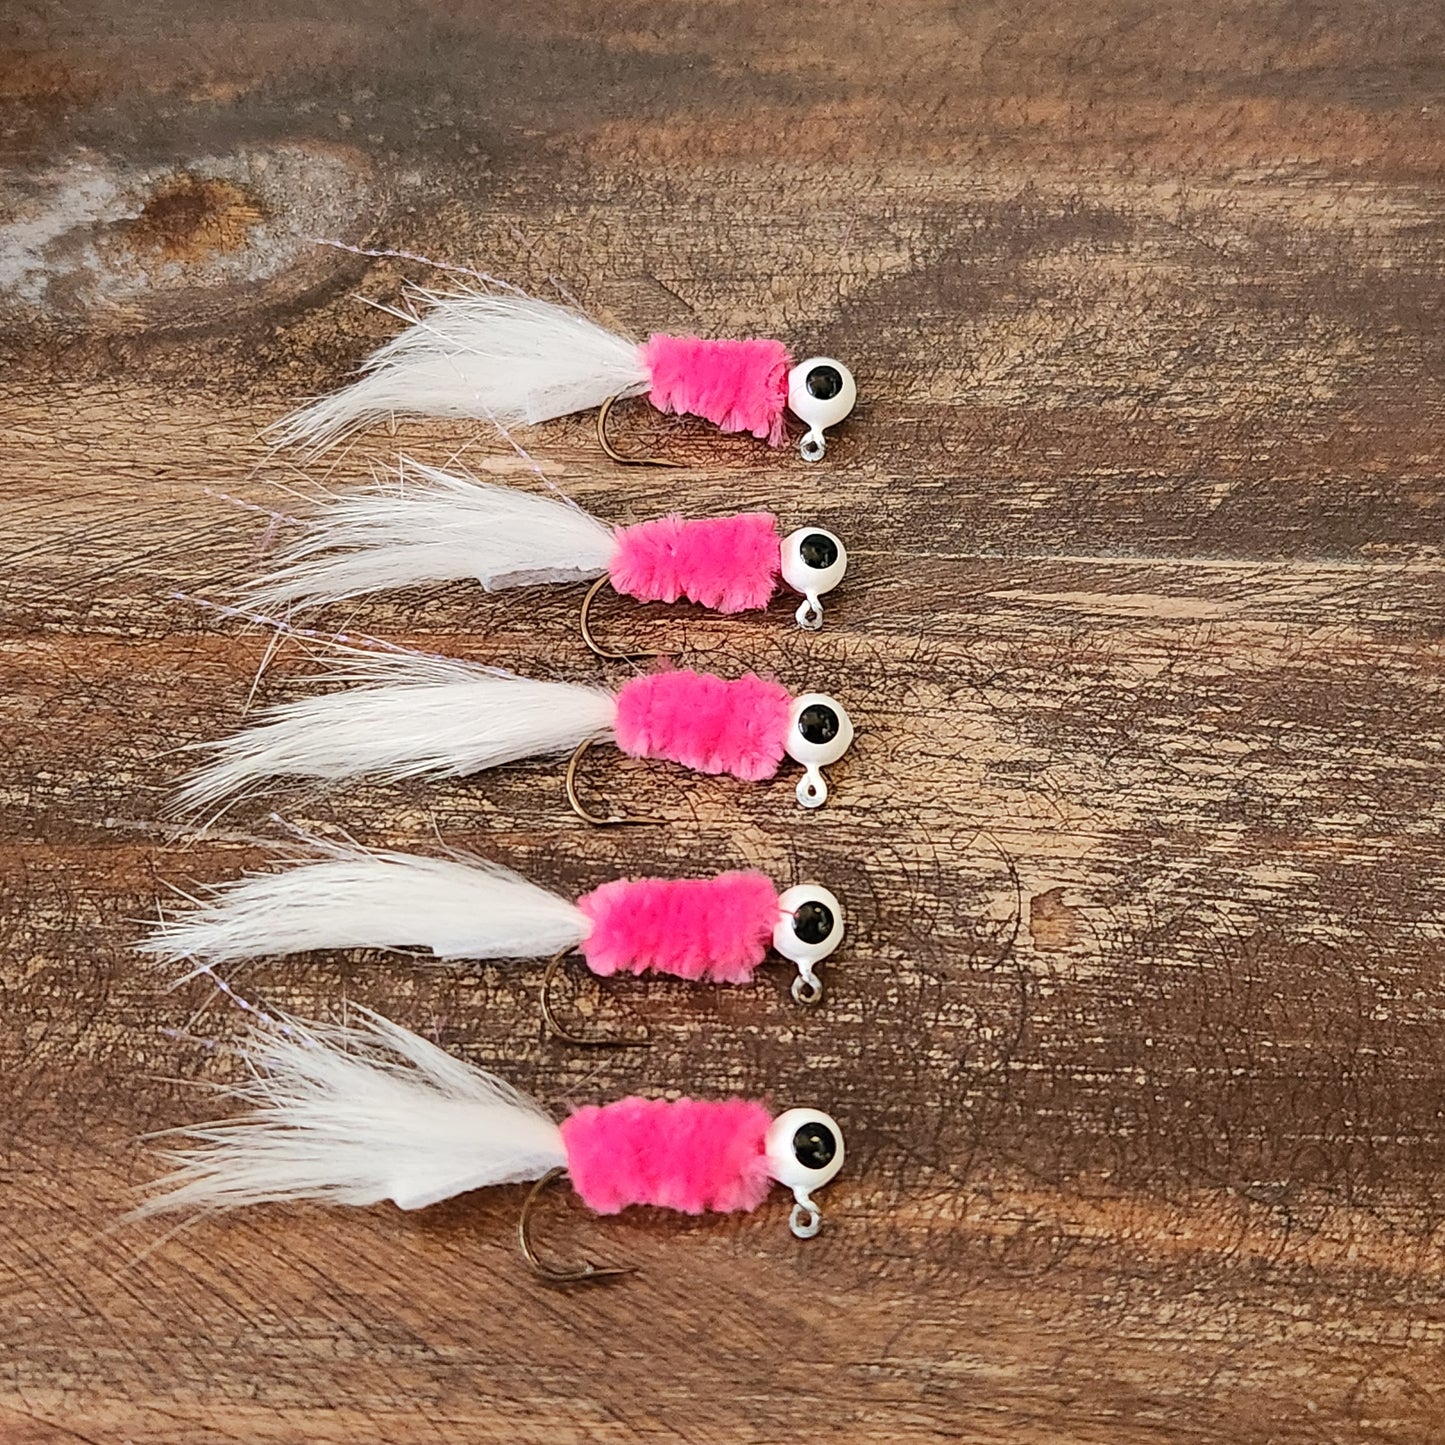 Crappie Jigs, Pink and White, 1/8 ounce, 5 pack for serious fishing.